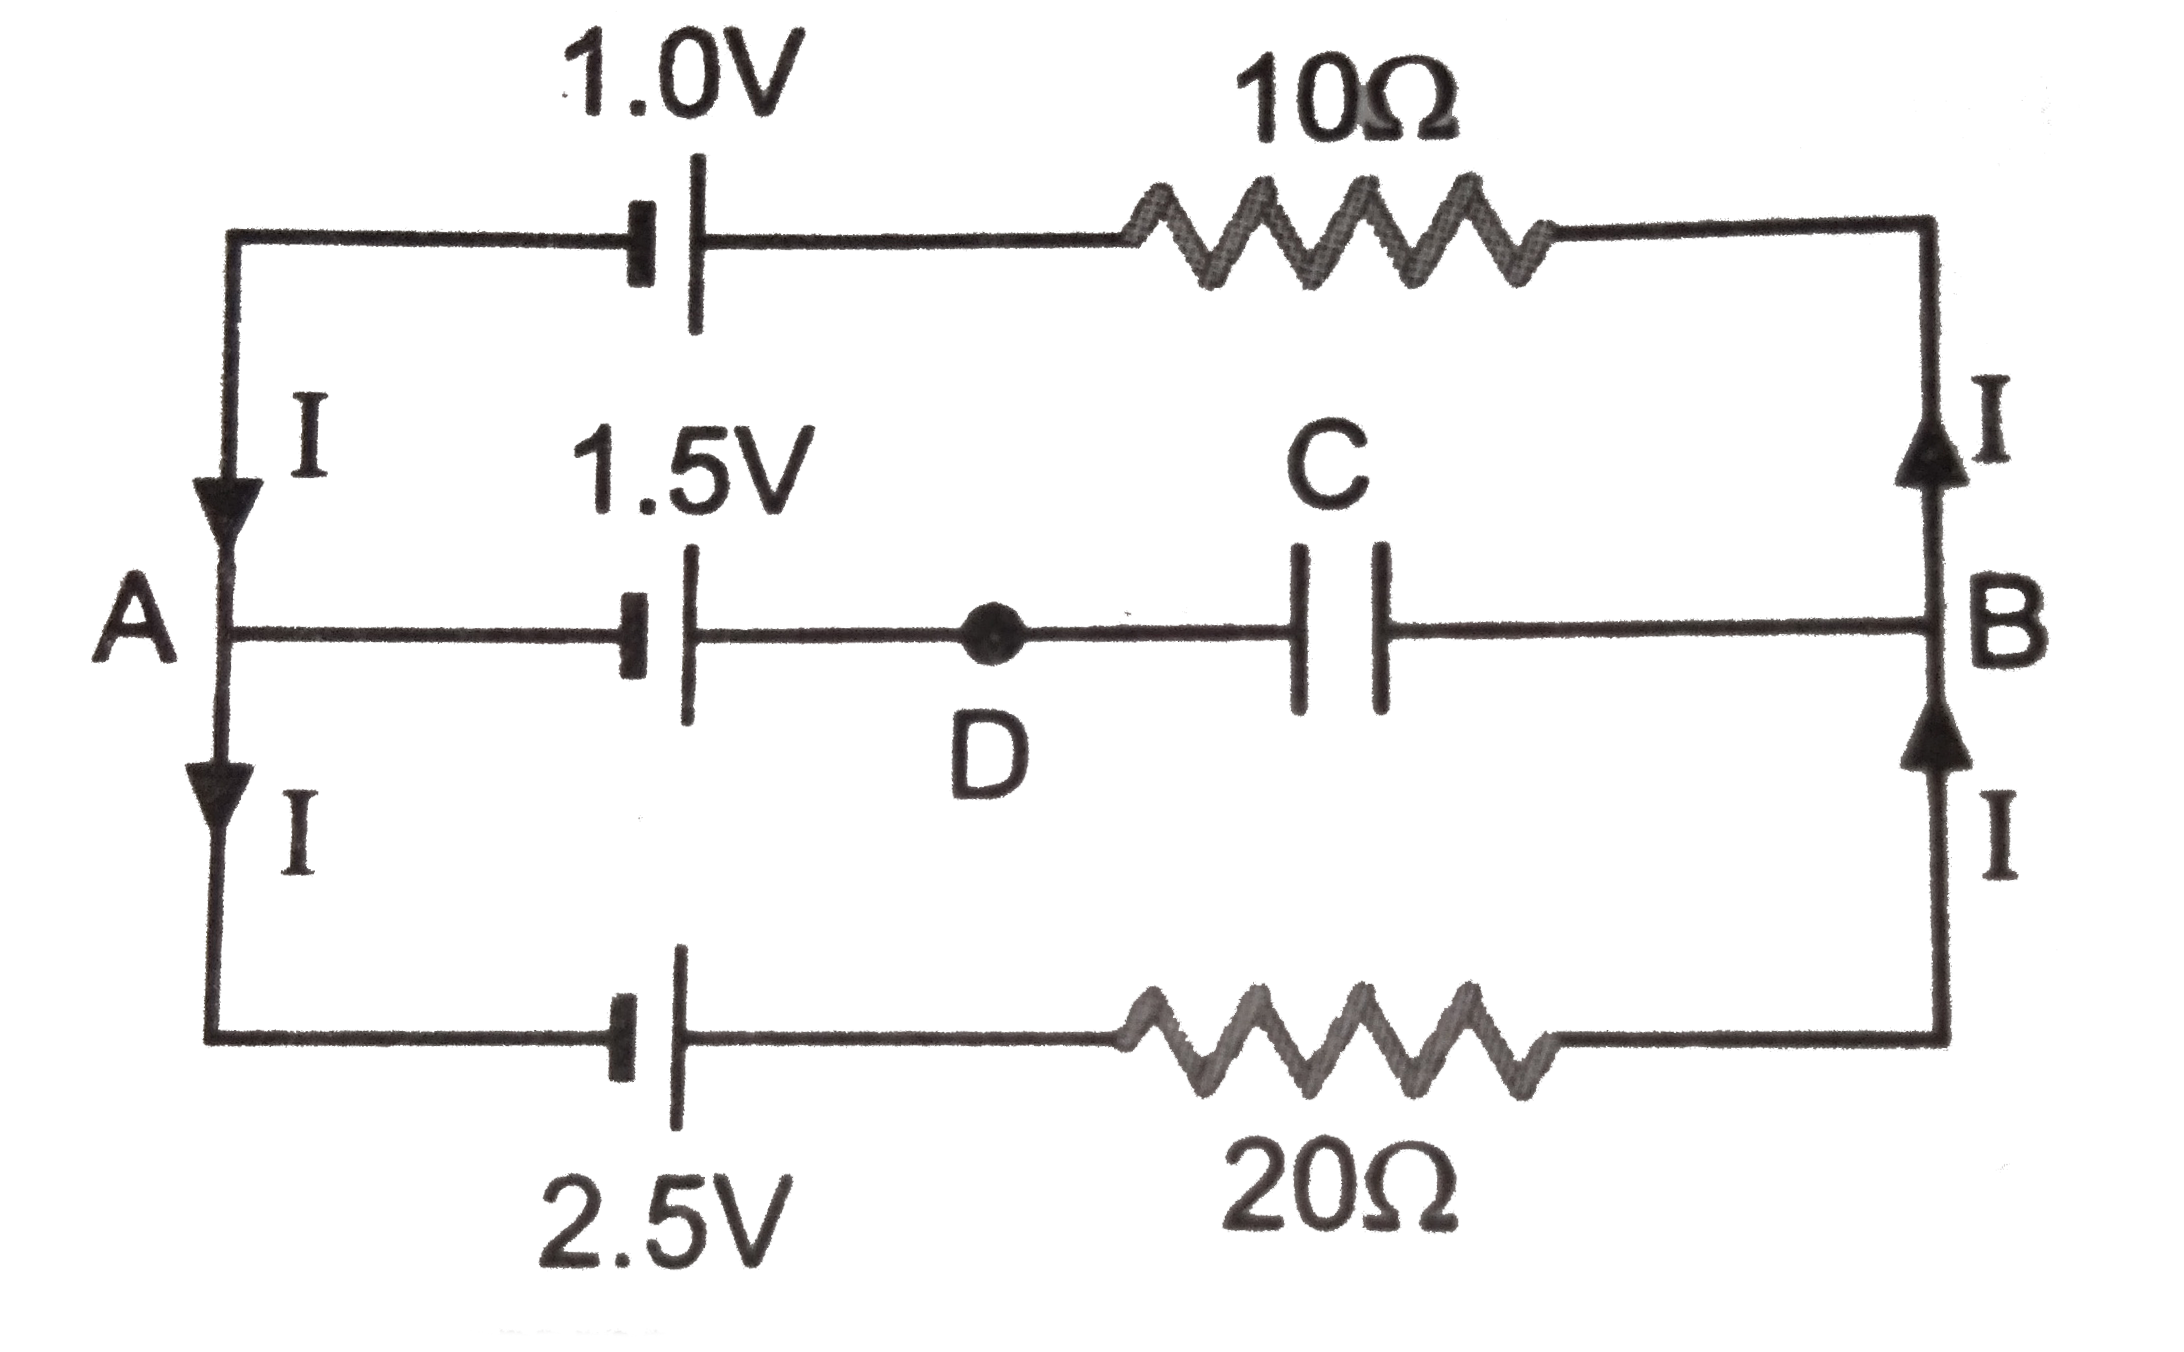 In the circuit diagram find the potential difference across the plates of capacitor C